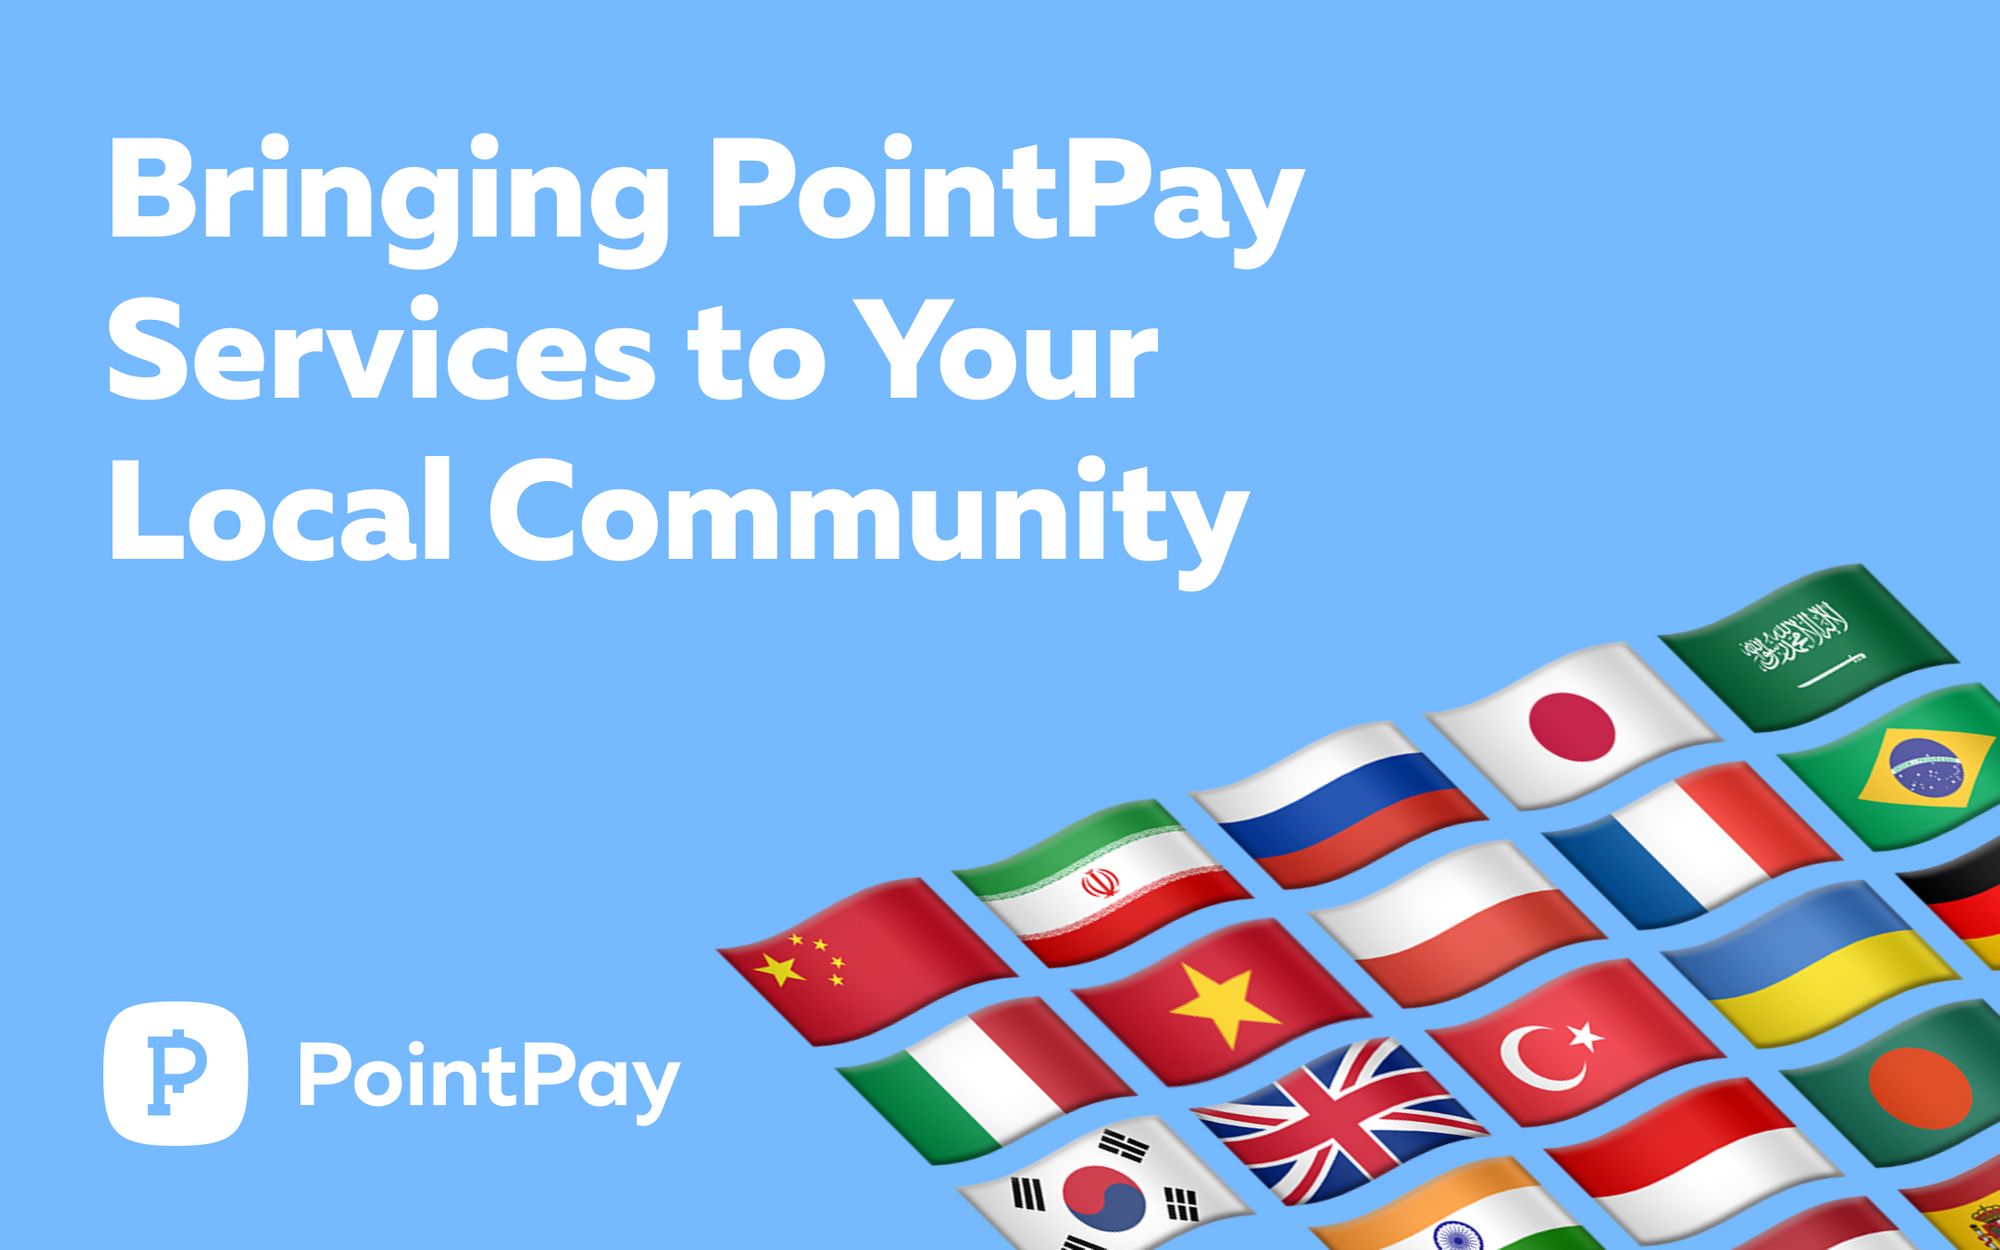 Bringing PointPay services to your local community